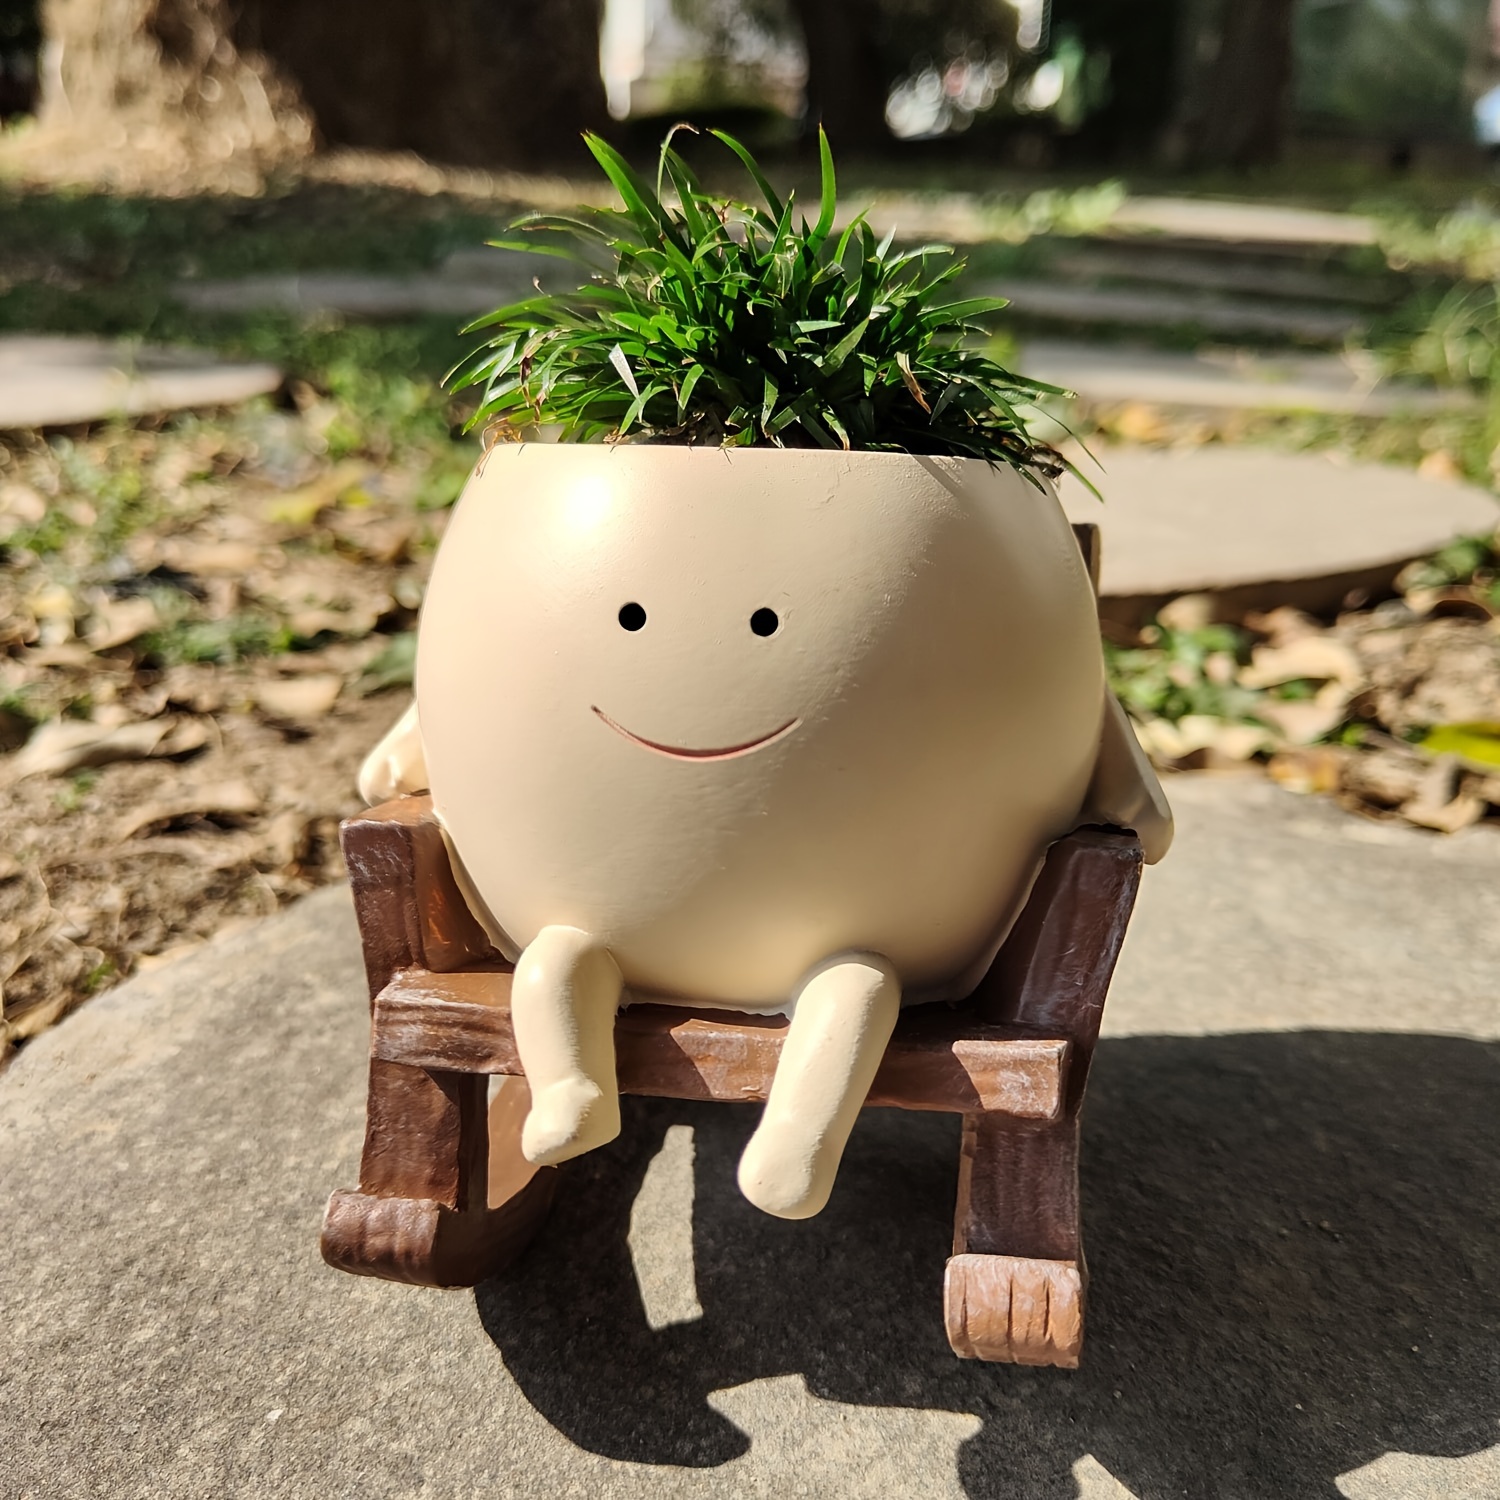 

1pc Creative Decorative Garden Plant Pot With Small Rocking Chair Design, Made Of Resin, Suitable For Succulents And Other Plants, Perfect For Home Gardening Decoration